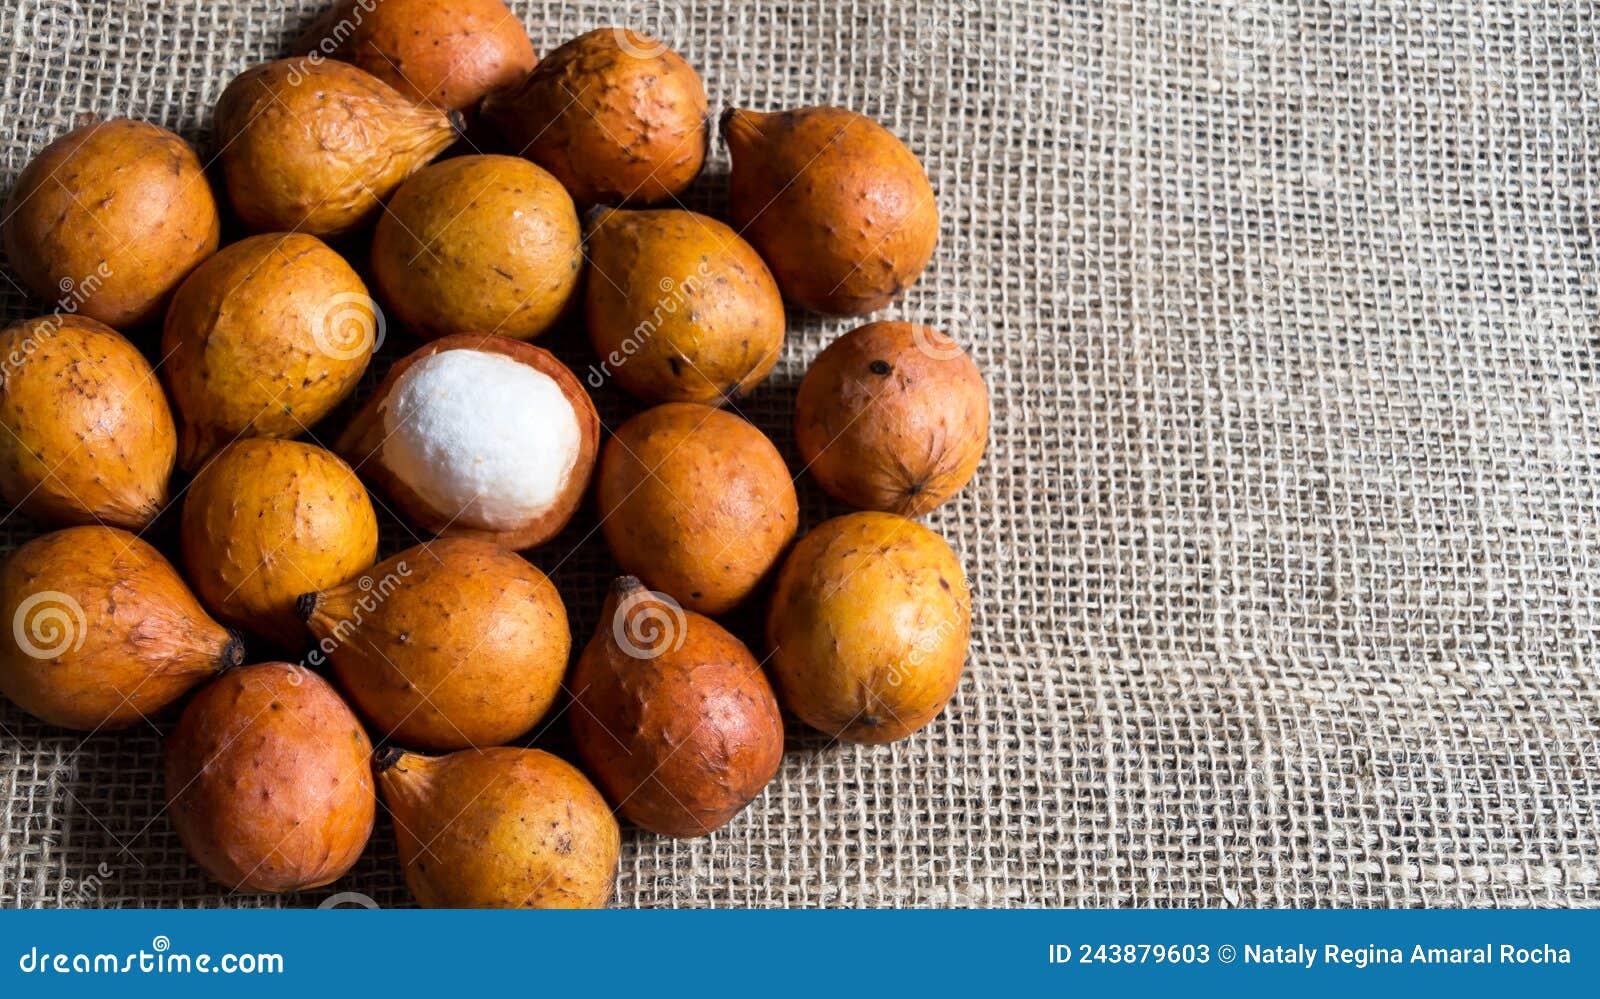 Small Round Brazilian Fruit with Yellow Skin and White Pulp Named ...